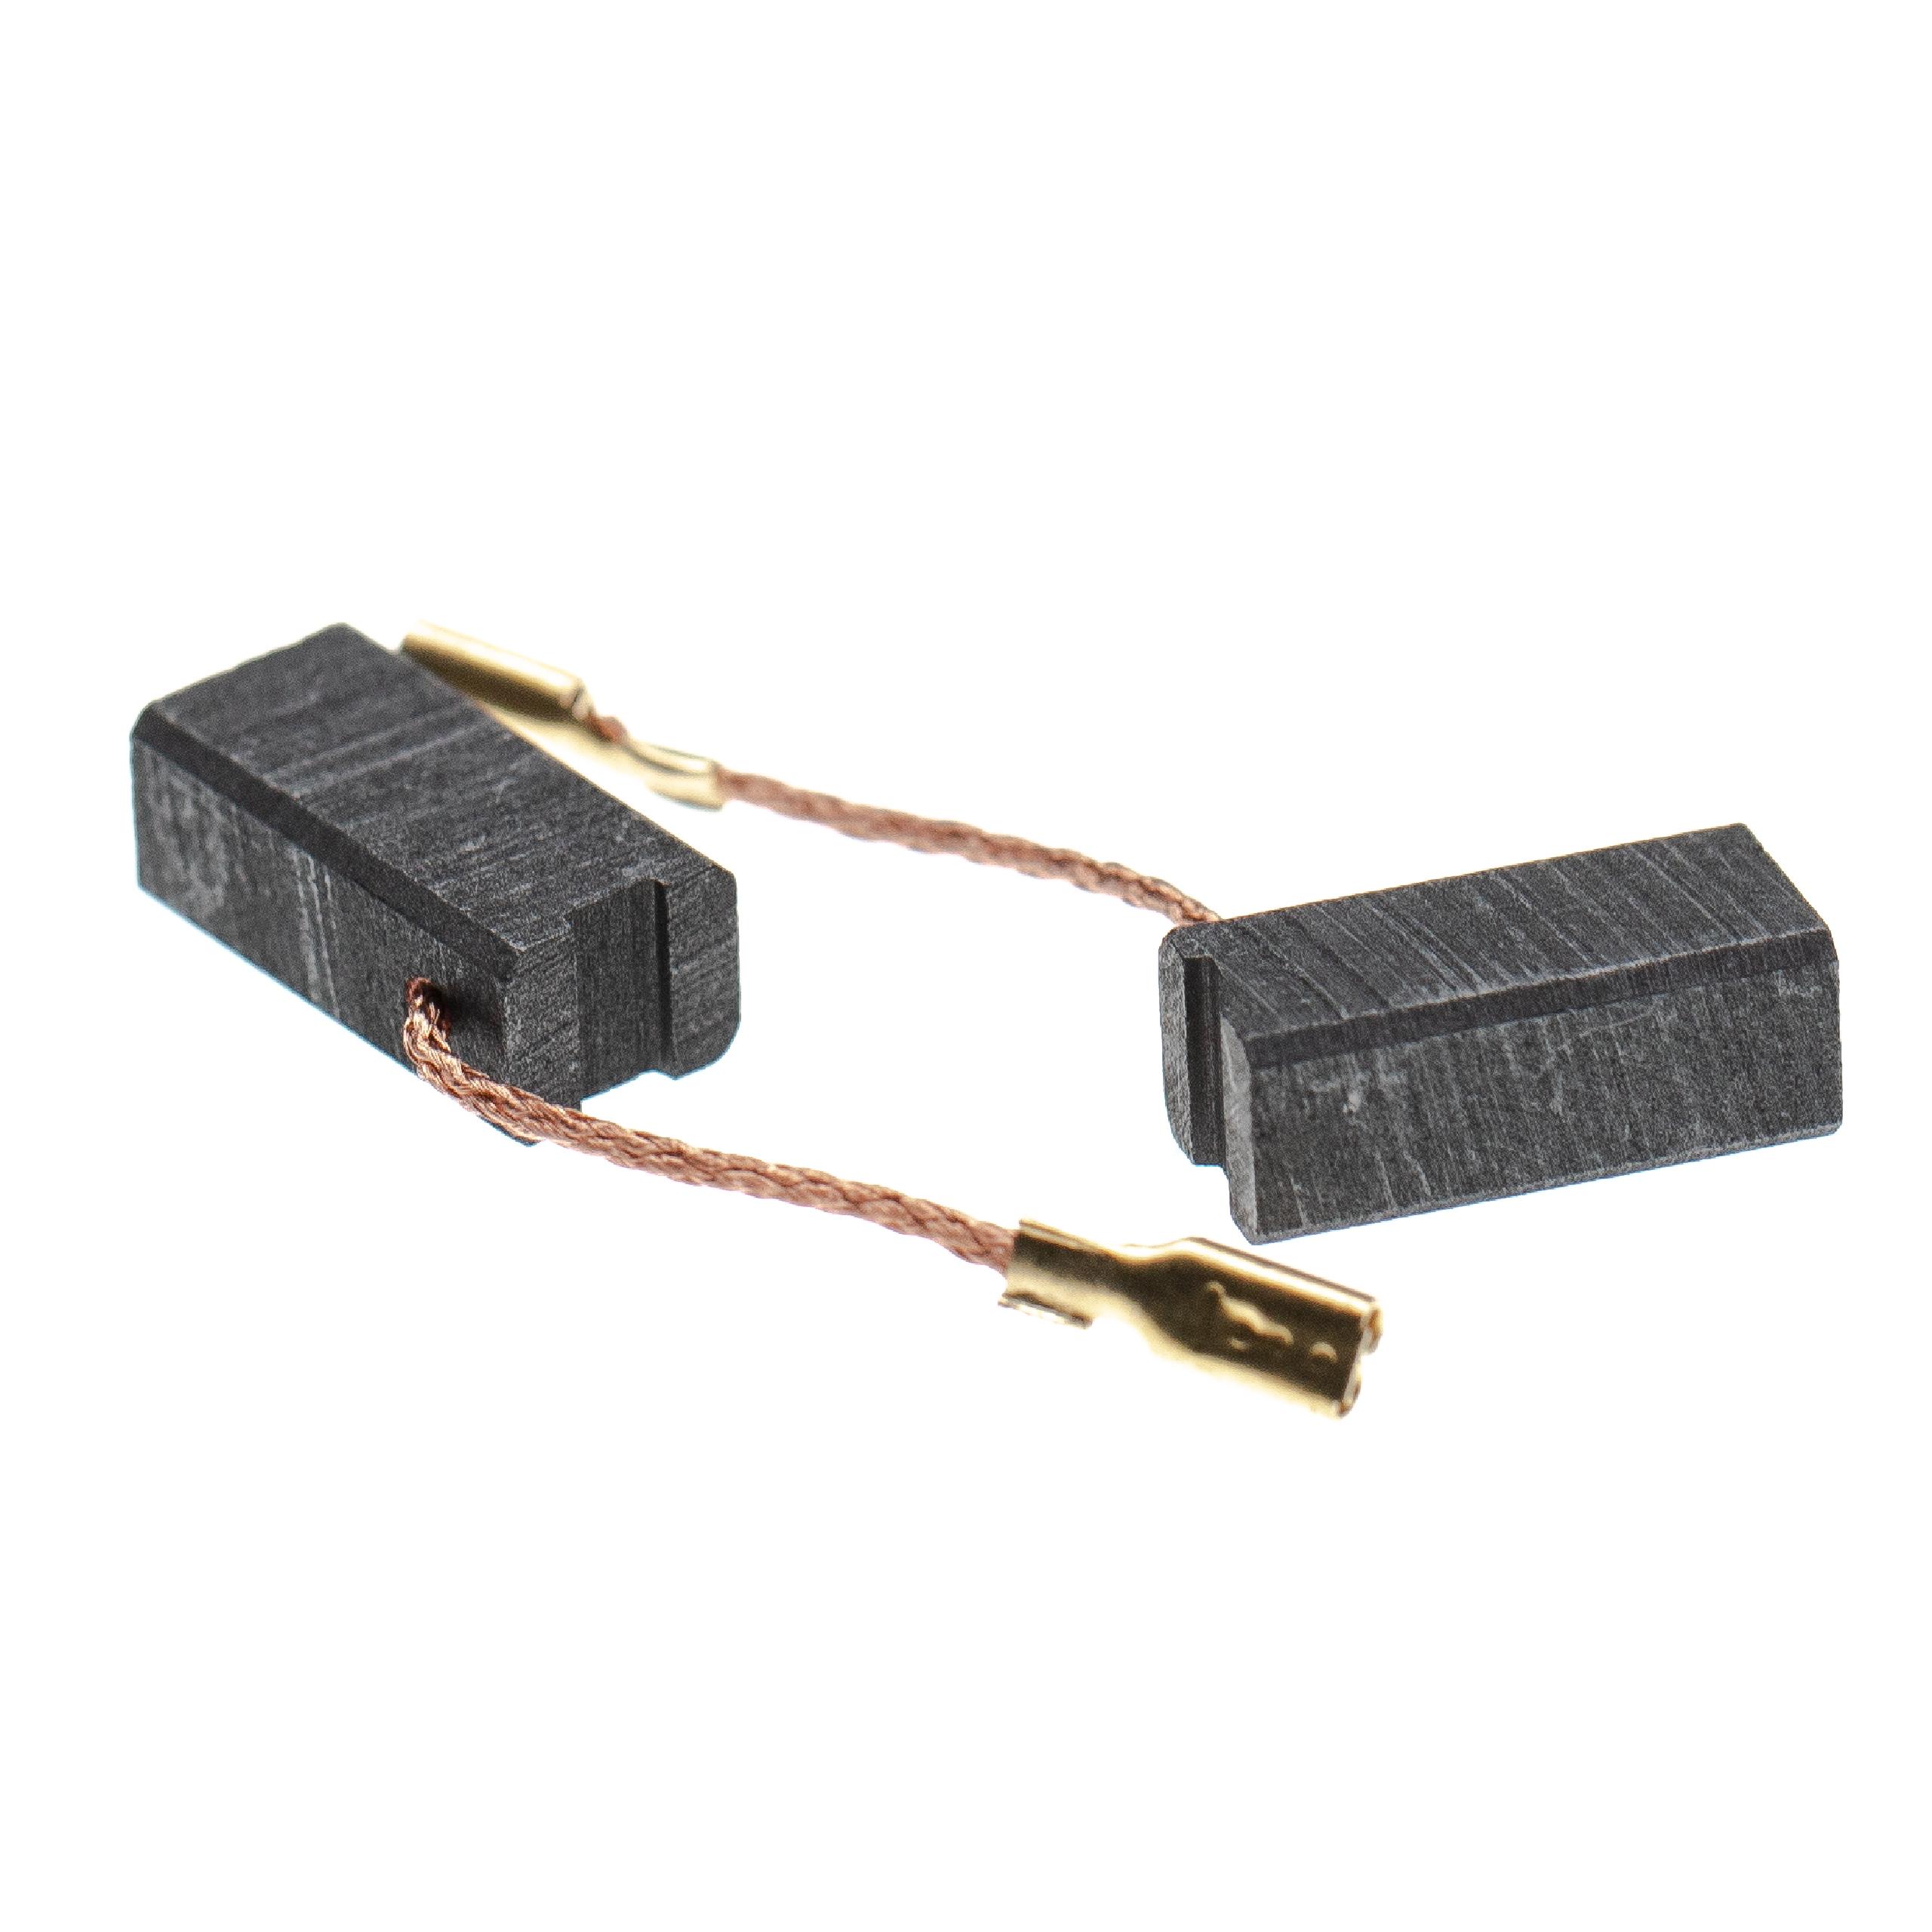 2x Carbon Brush as Replacement for Metabo 20-016 Electric Power Tools + Angled Connector, 16.3 x 8 x 6.2mm